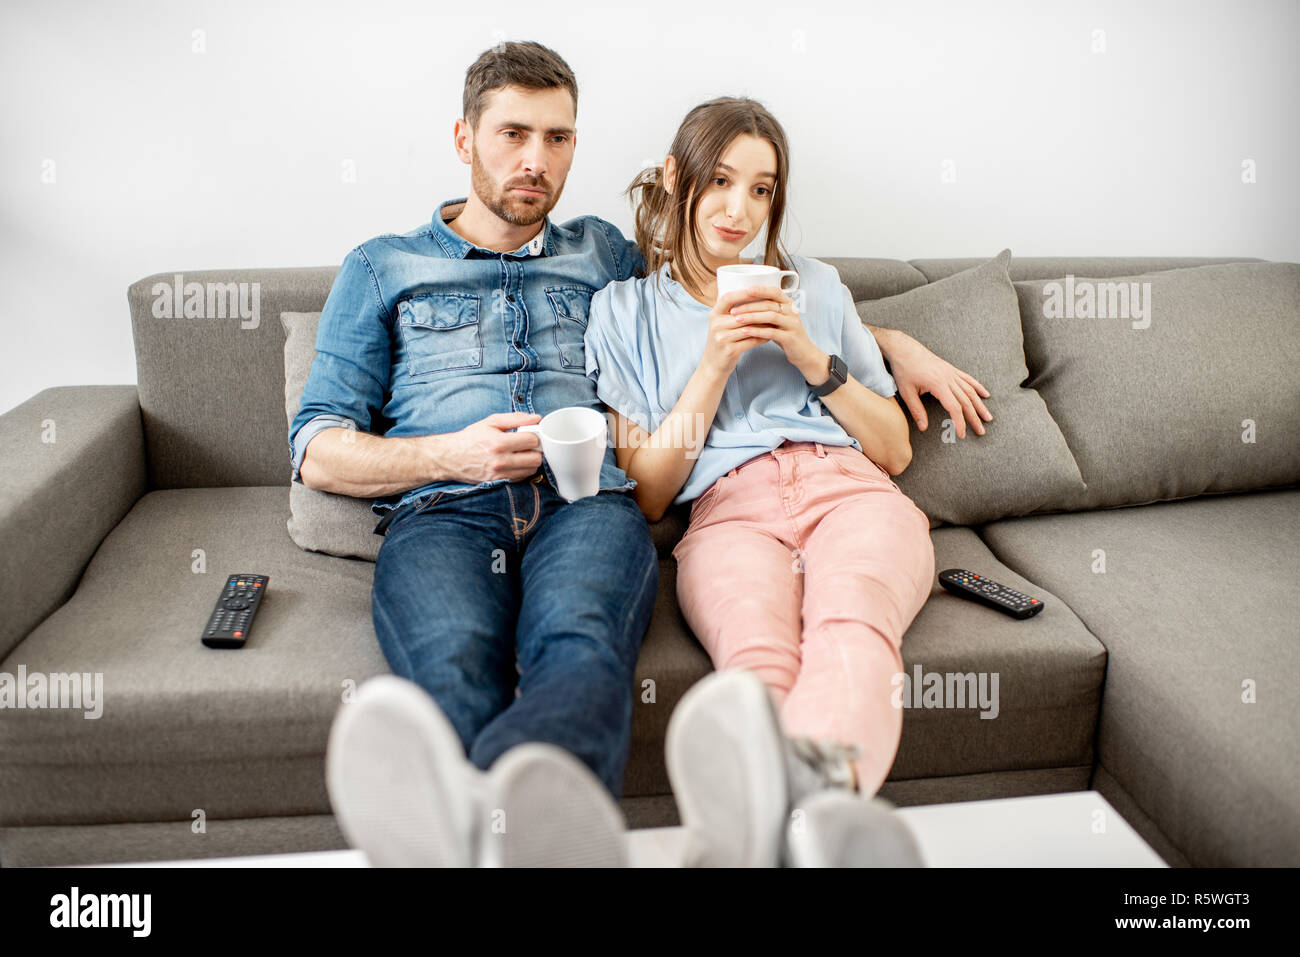 Young Couple With Unhappy Faces Watching Boring Tv Sitting Together On